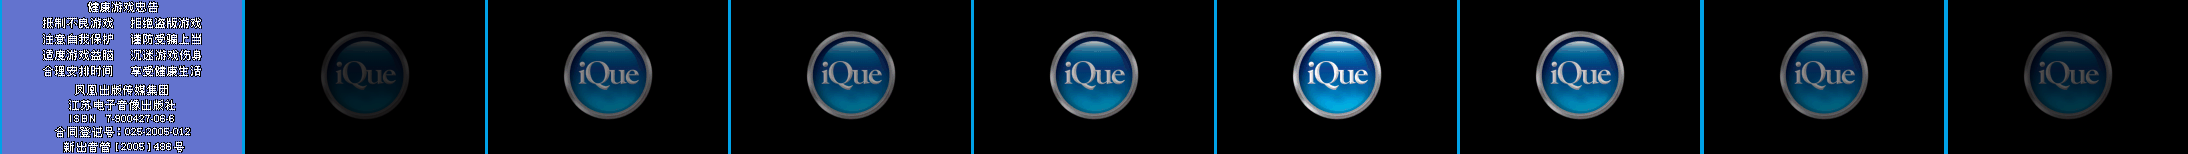 Healthy Game Advice+iQue Logo